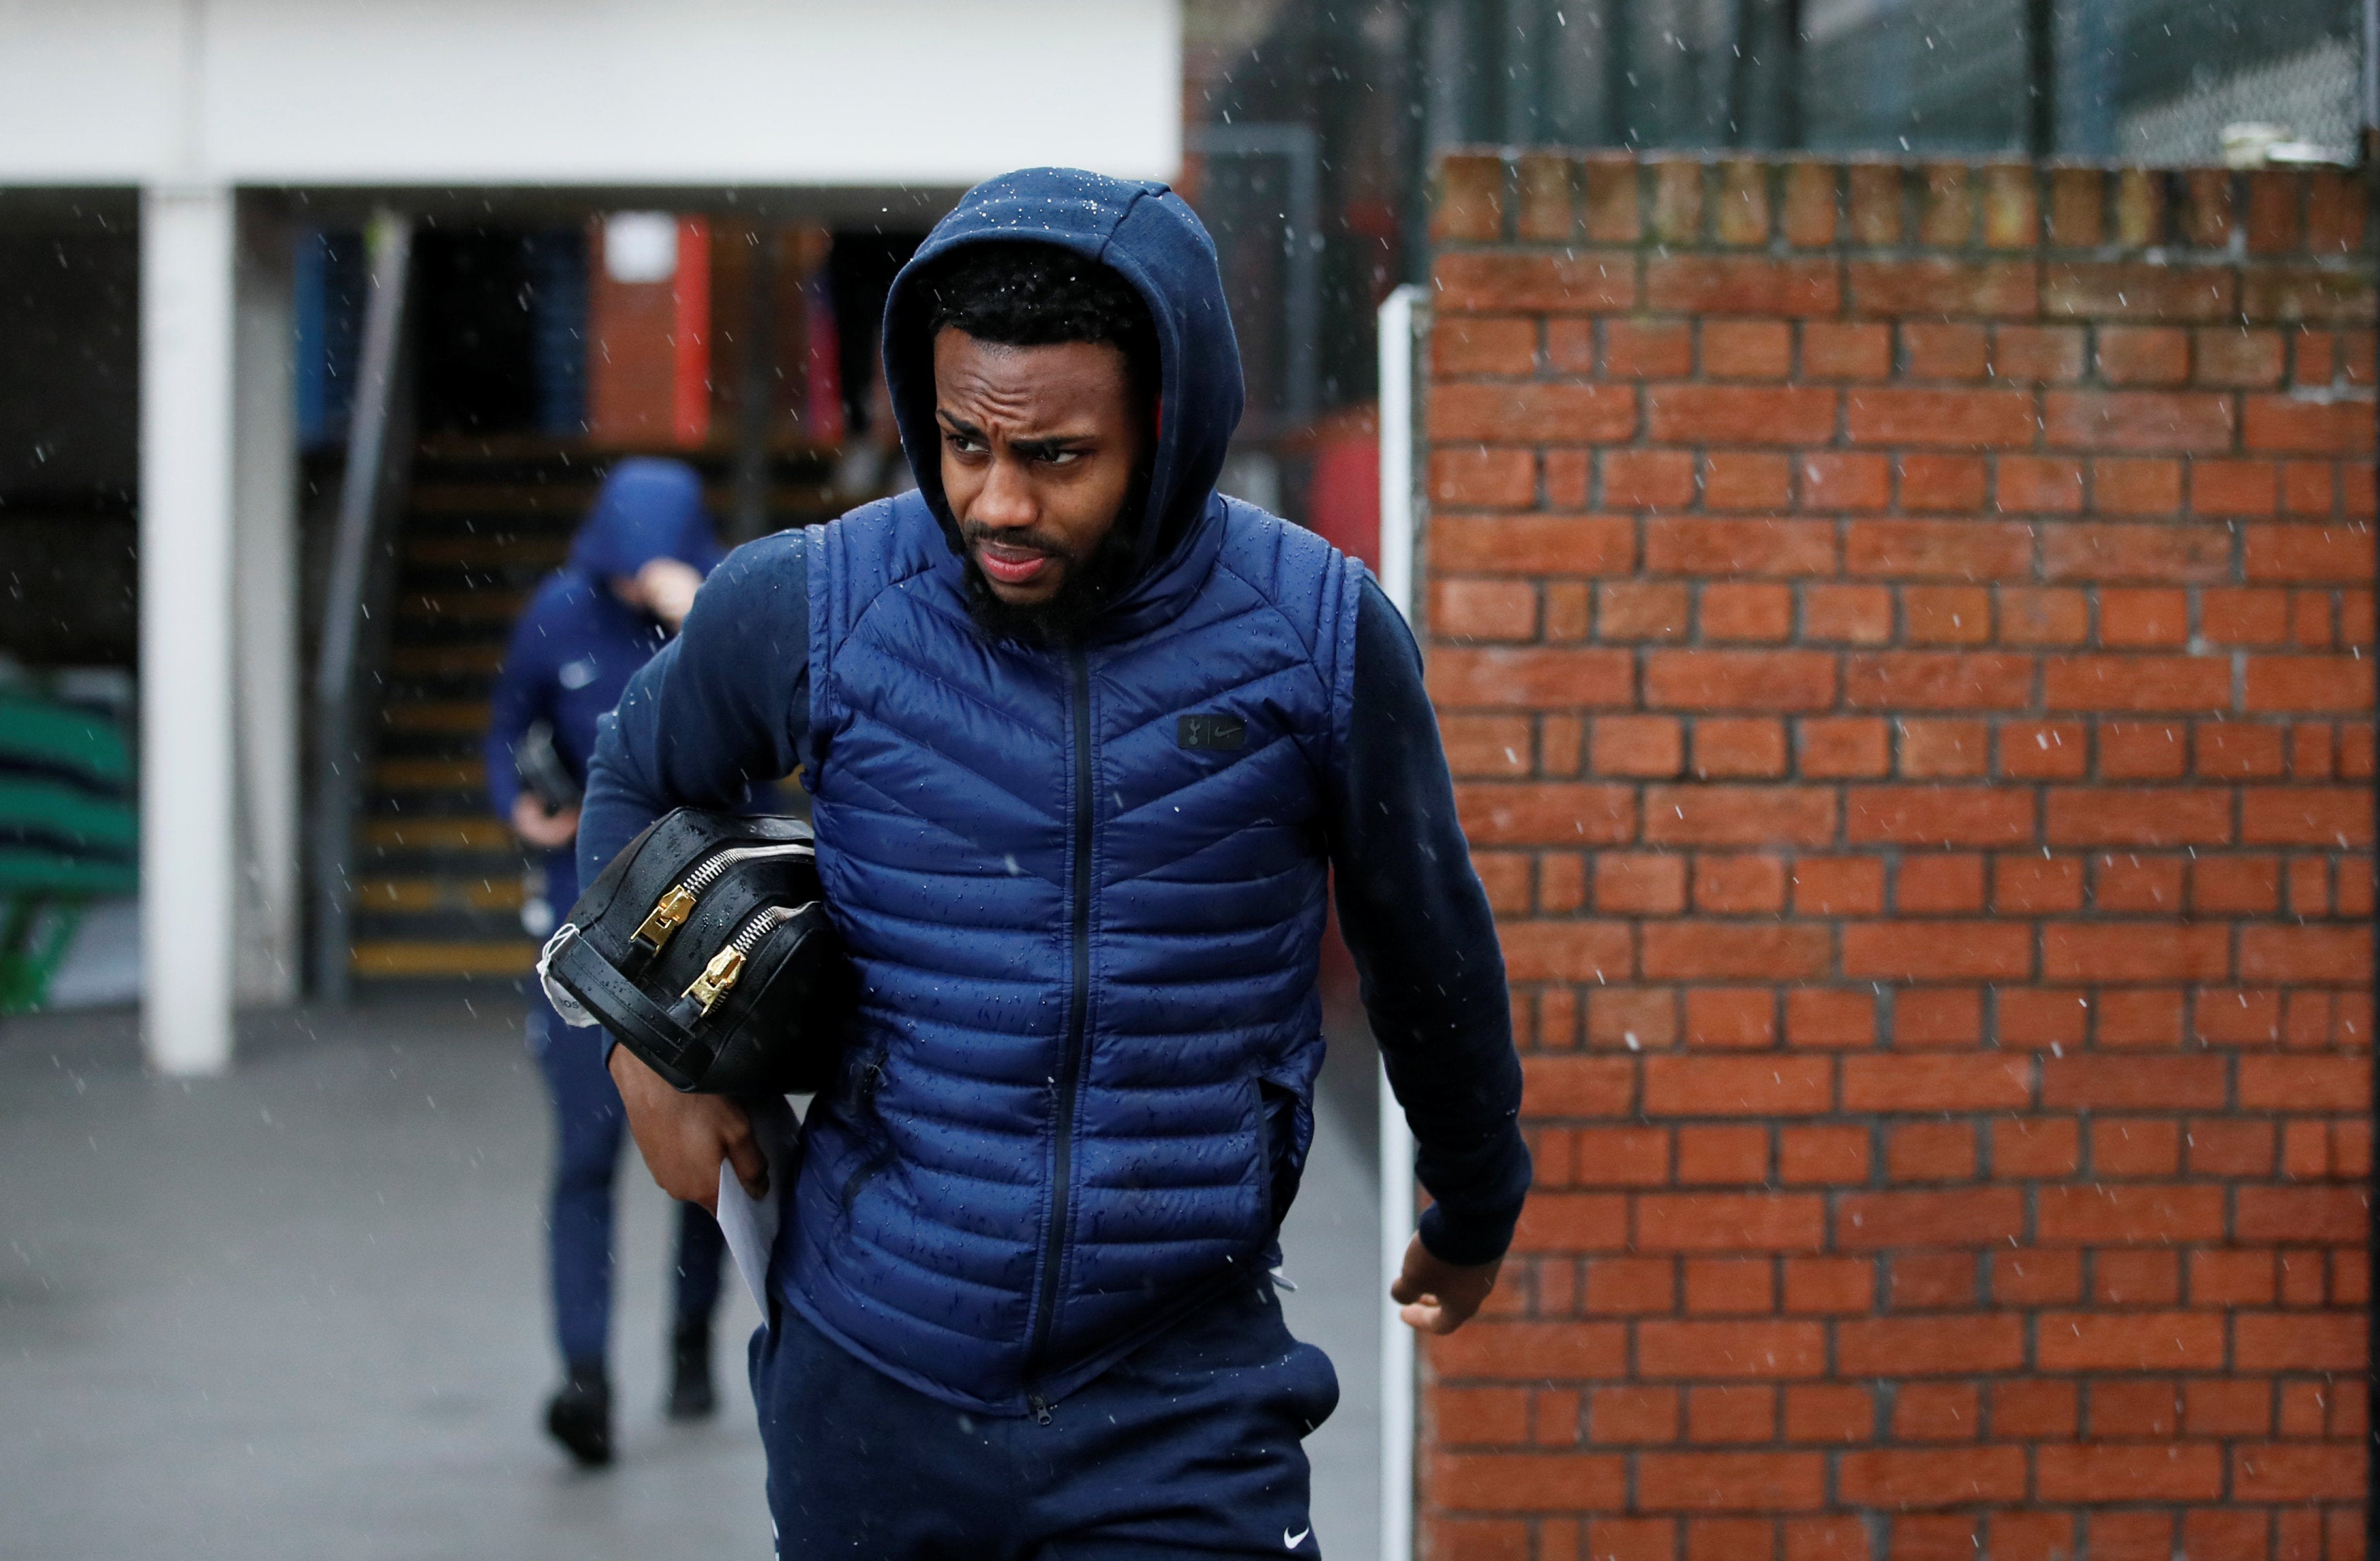 Danny Rose was arrested by police in Northampton on Wednesday morning